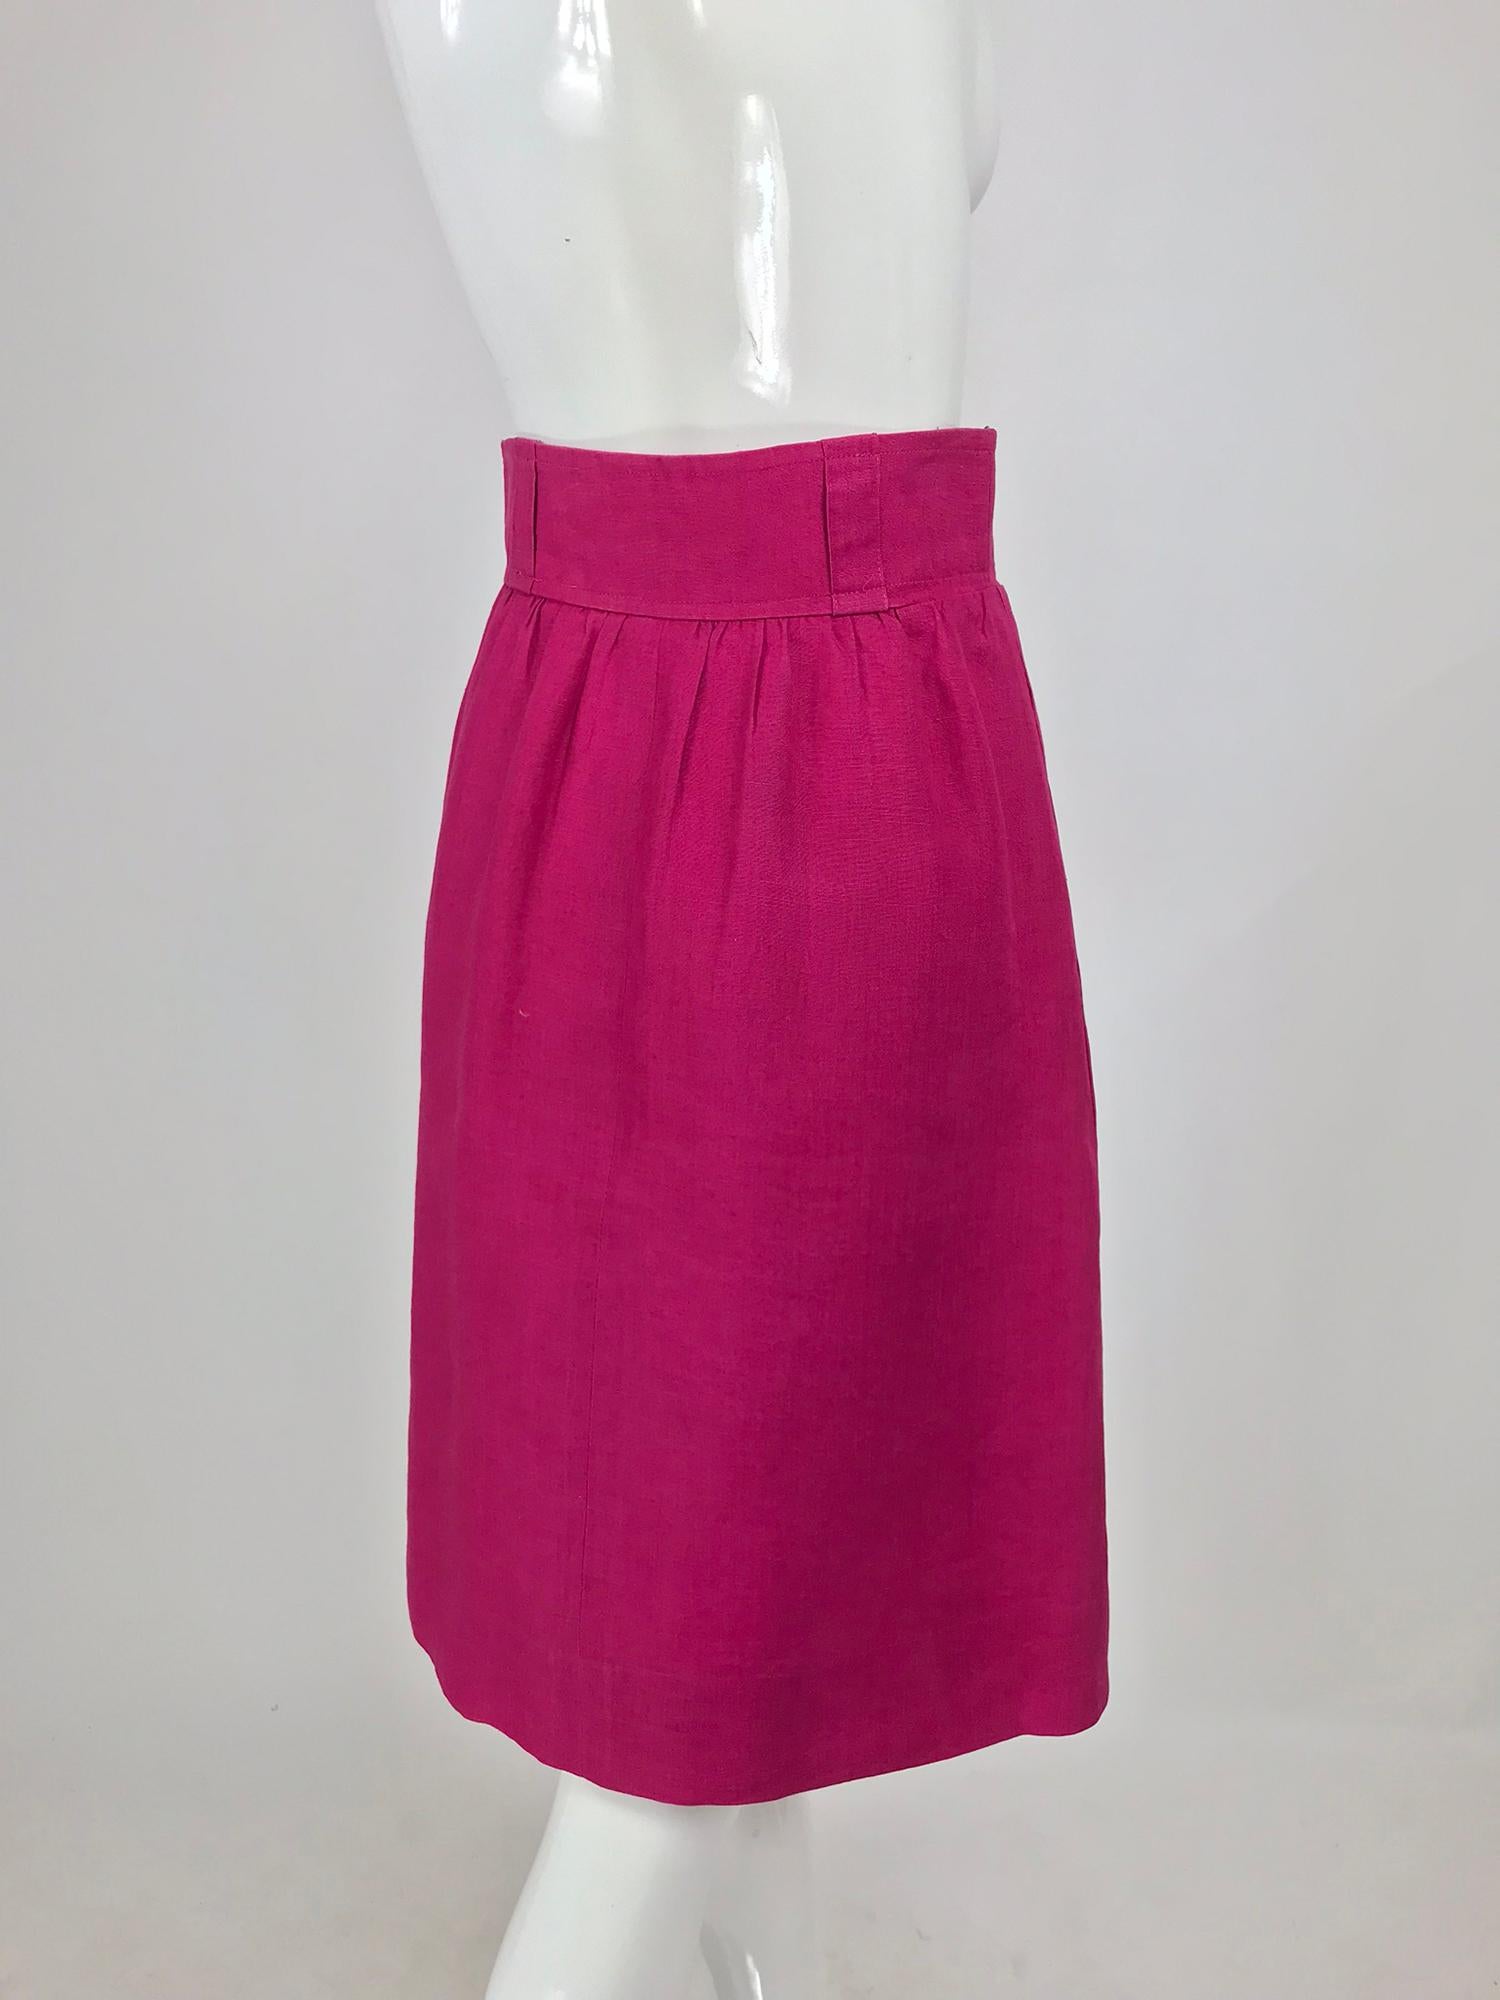 Givenchy Hot Pink Linen Skirt 1980s 2